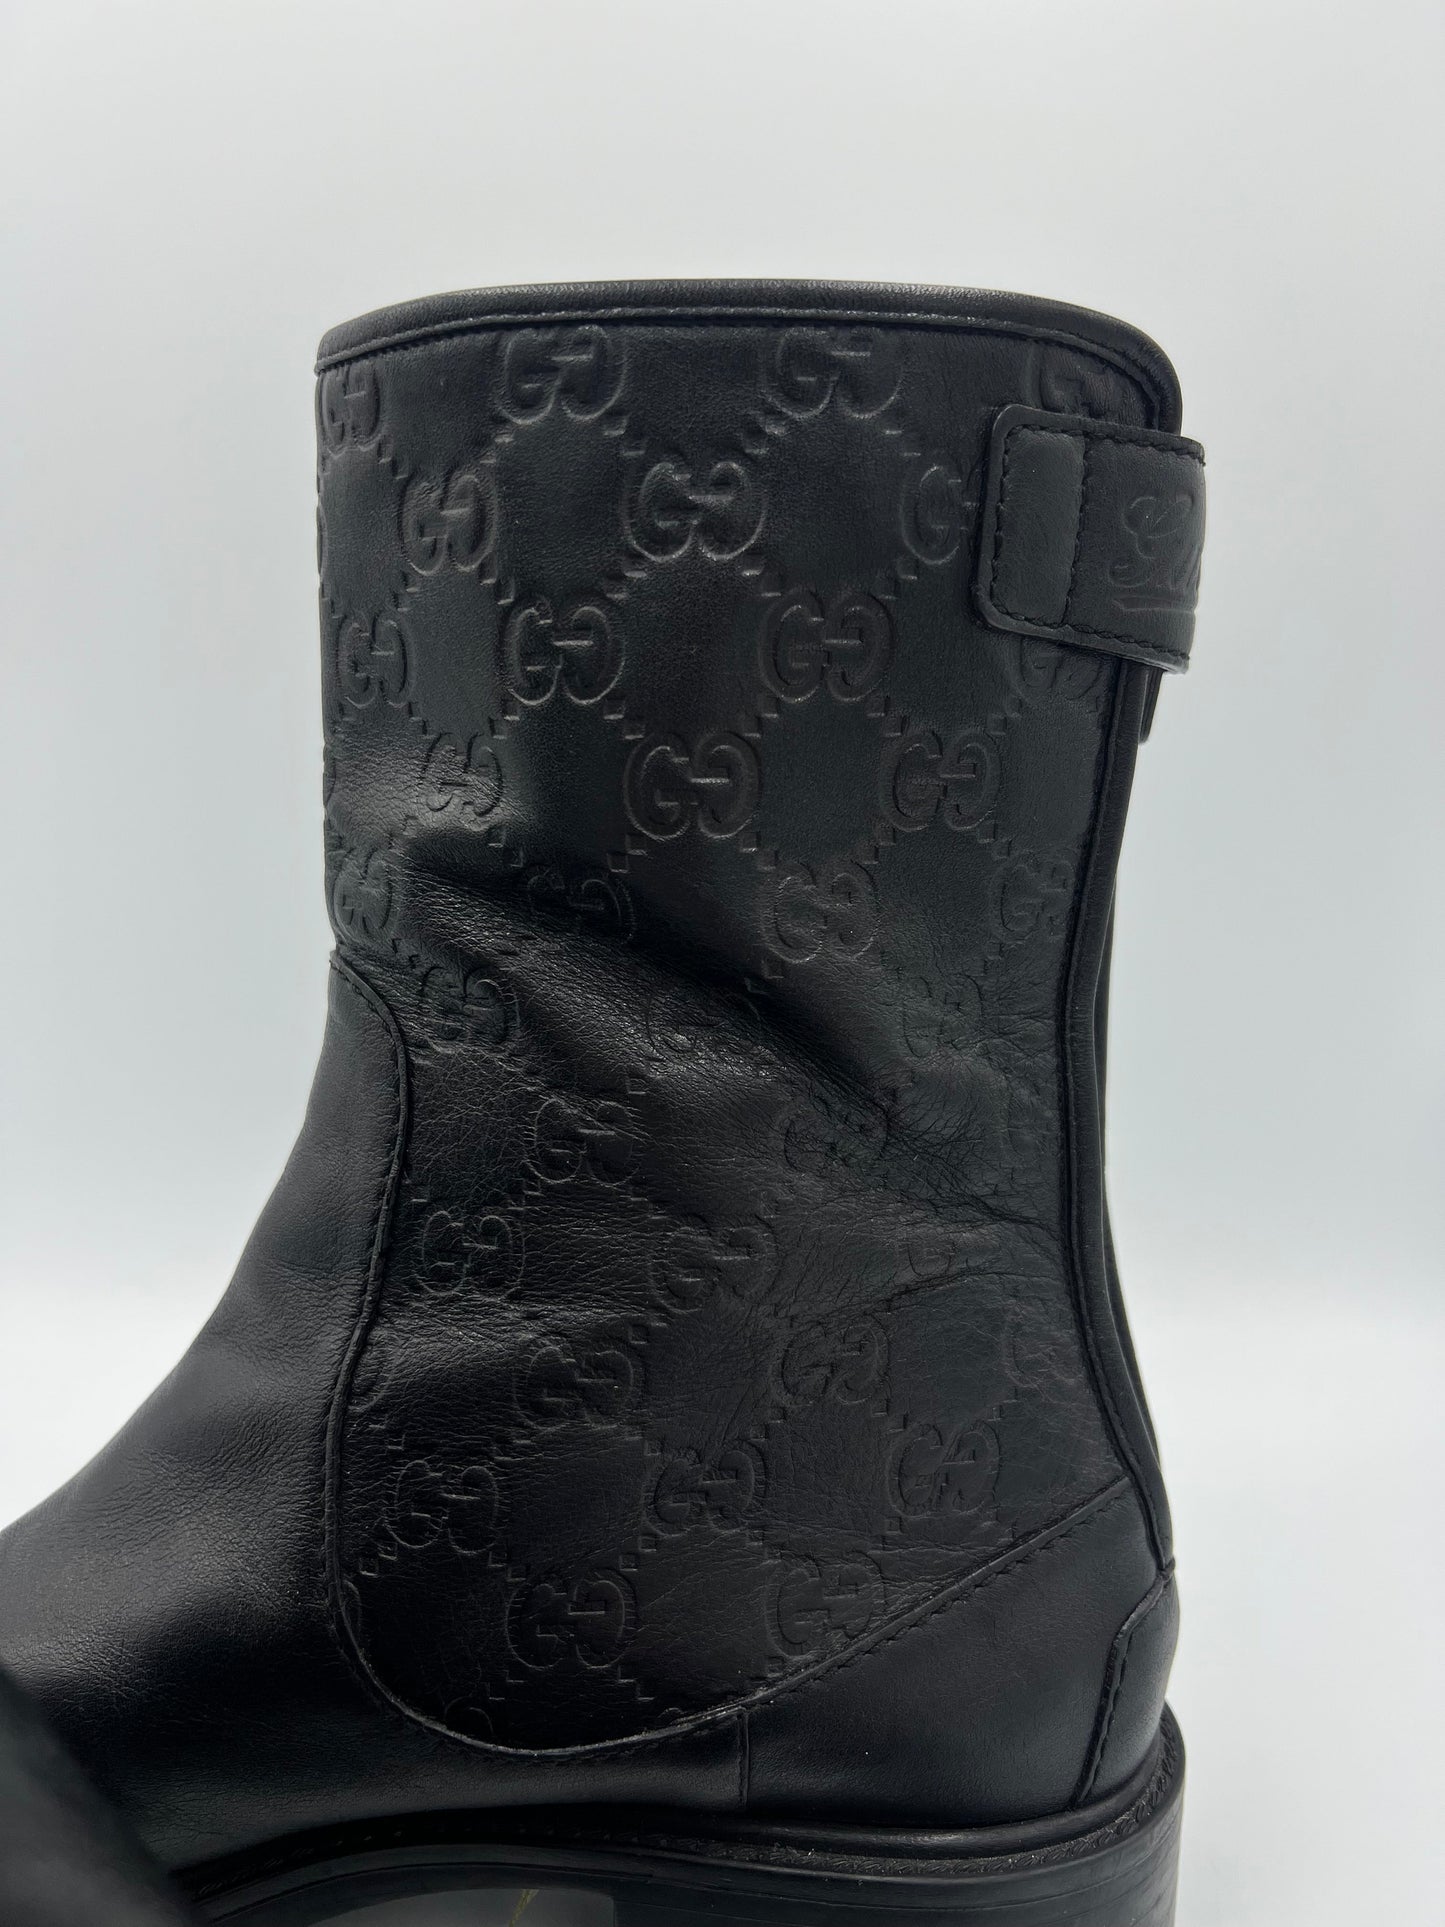 Gucci GG Imprint Leather Logo Boots   Size: 8